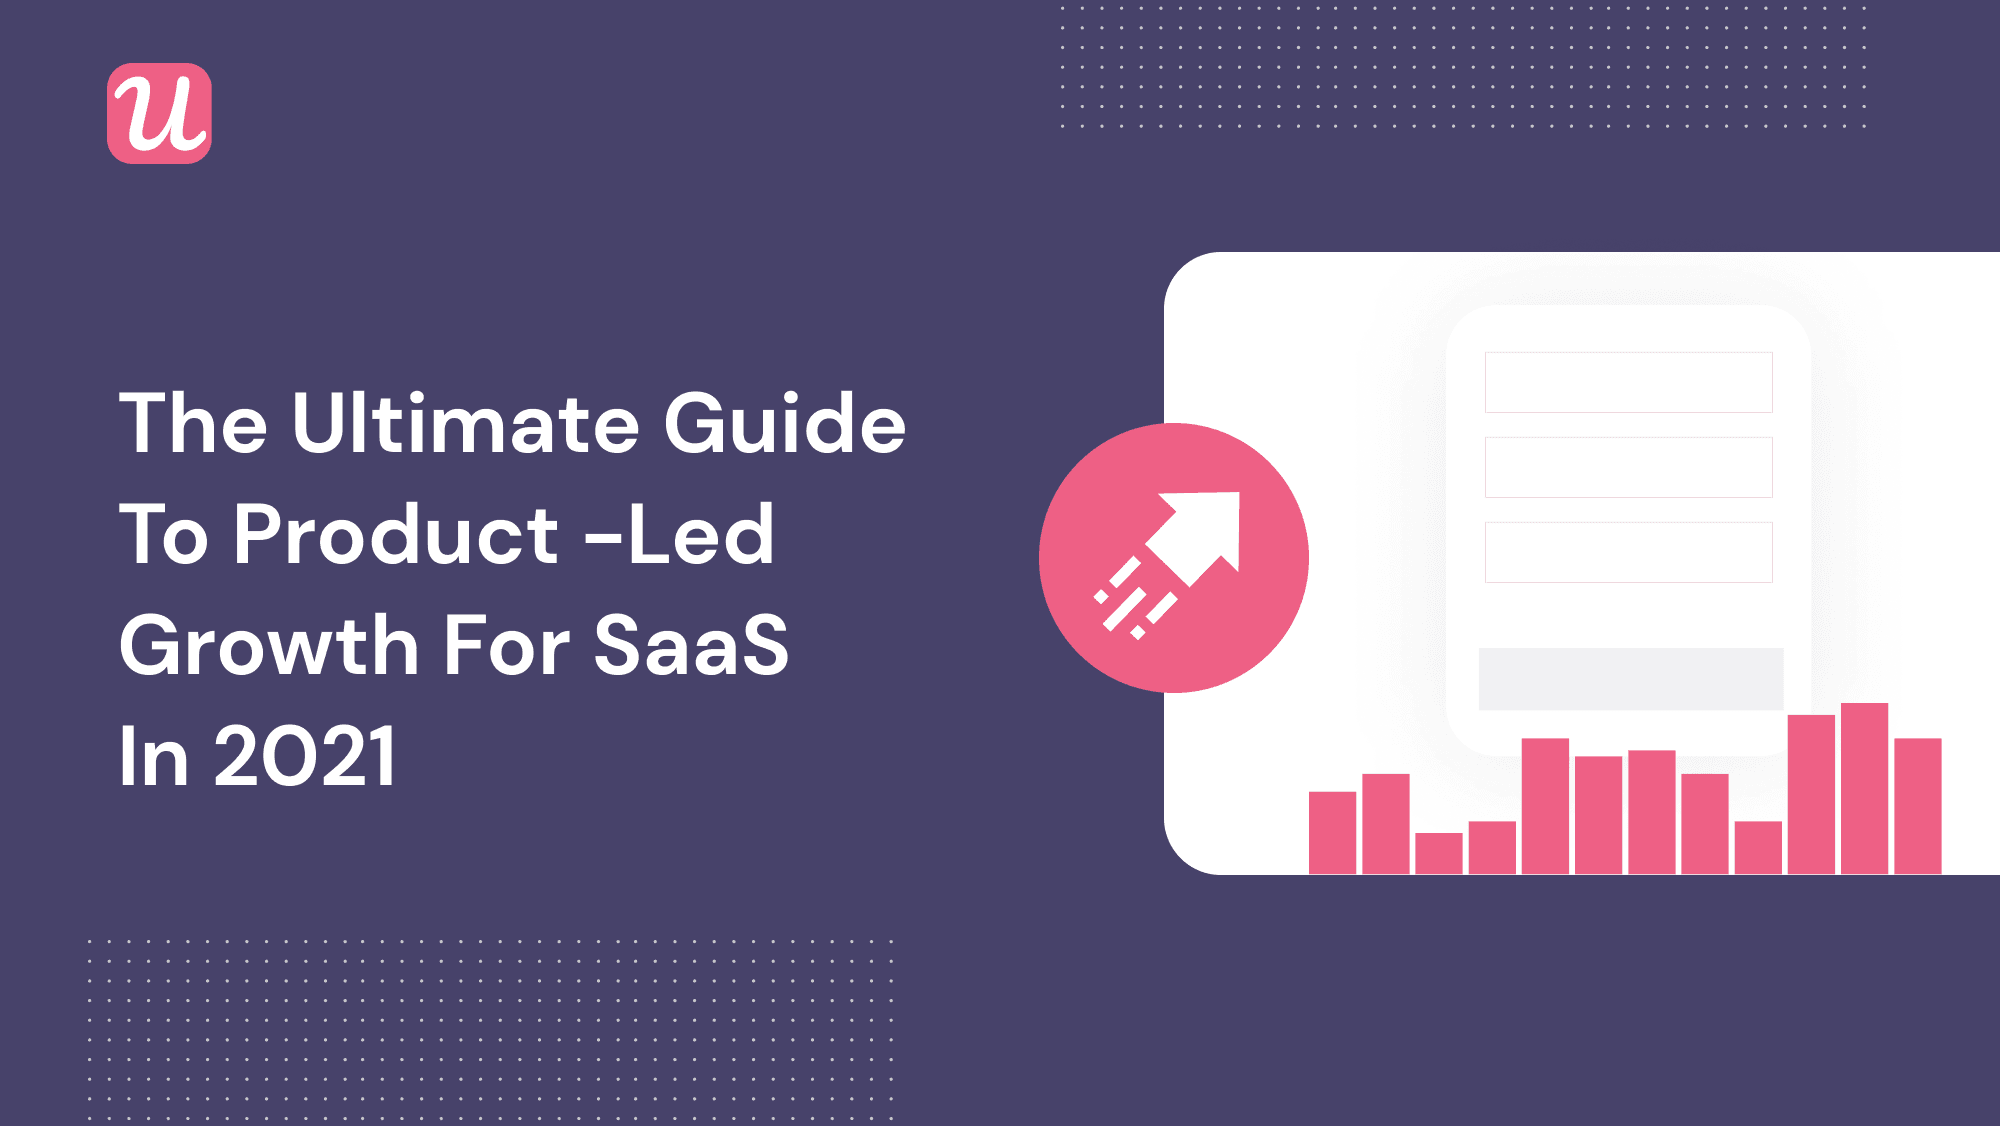 The Ultimate Guide to Product-Led Growth for SaaS in 2021